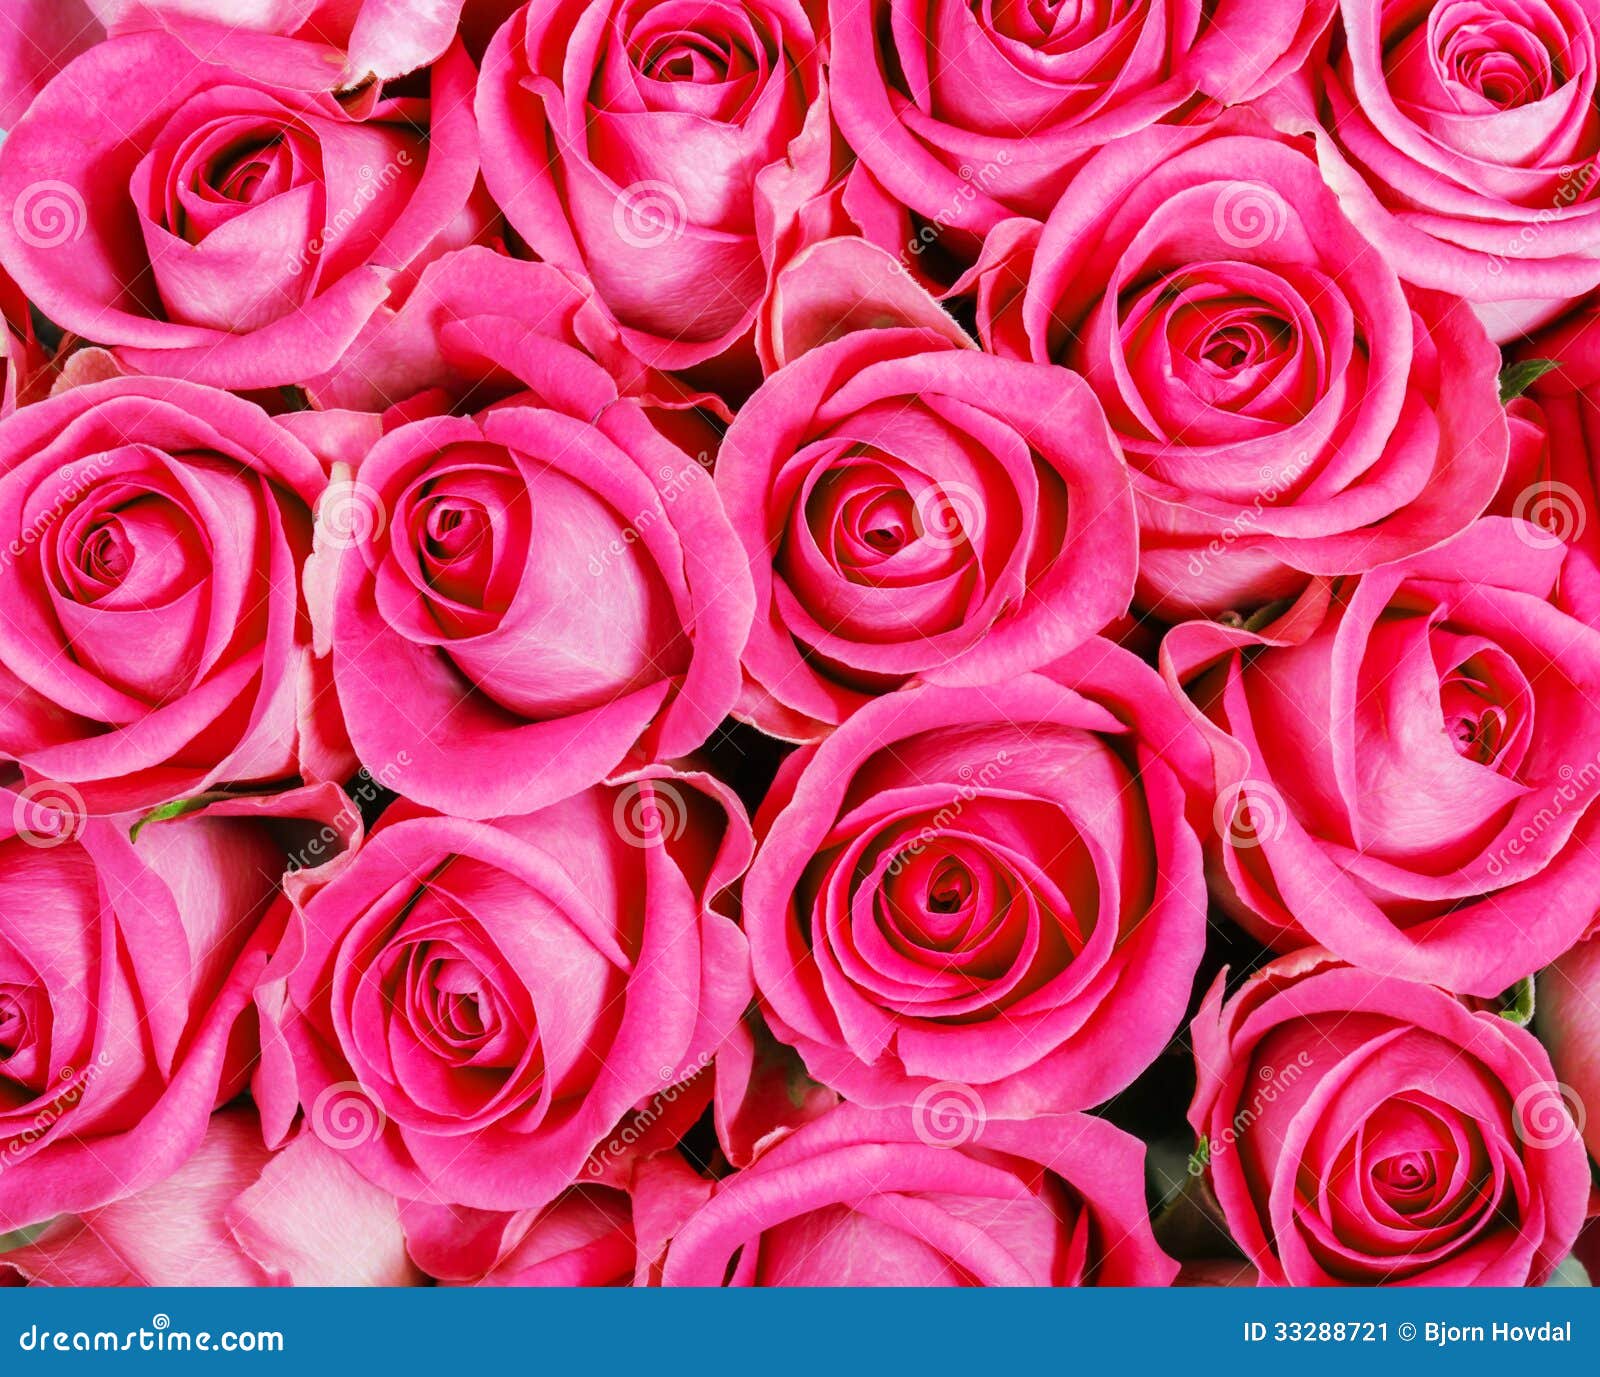 Interessant commentator Bandiet Pink roses stock image. Image of detail, details, beauty - 33288721